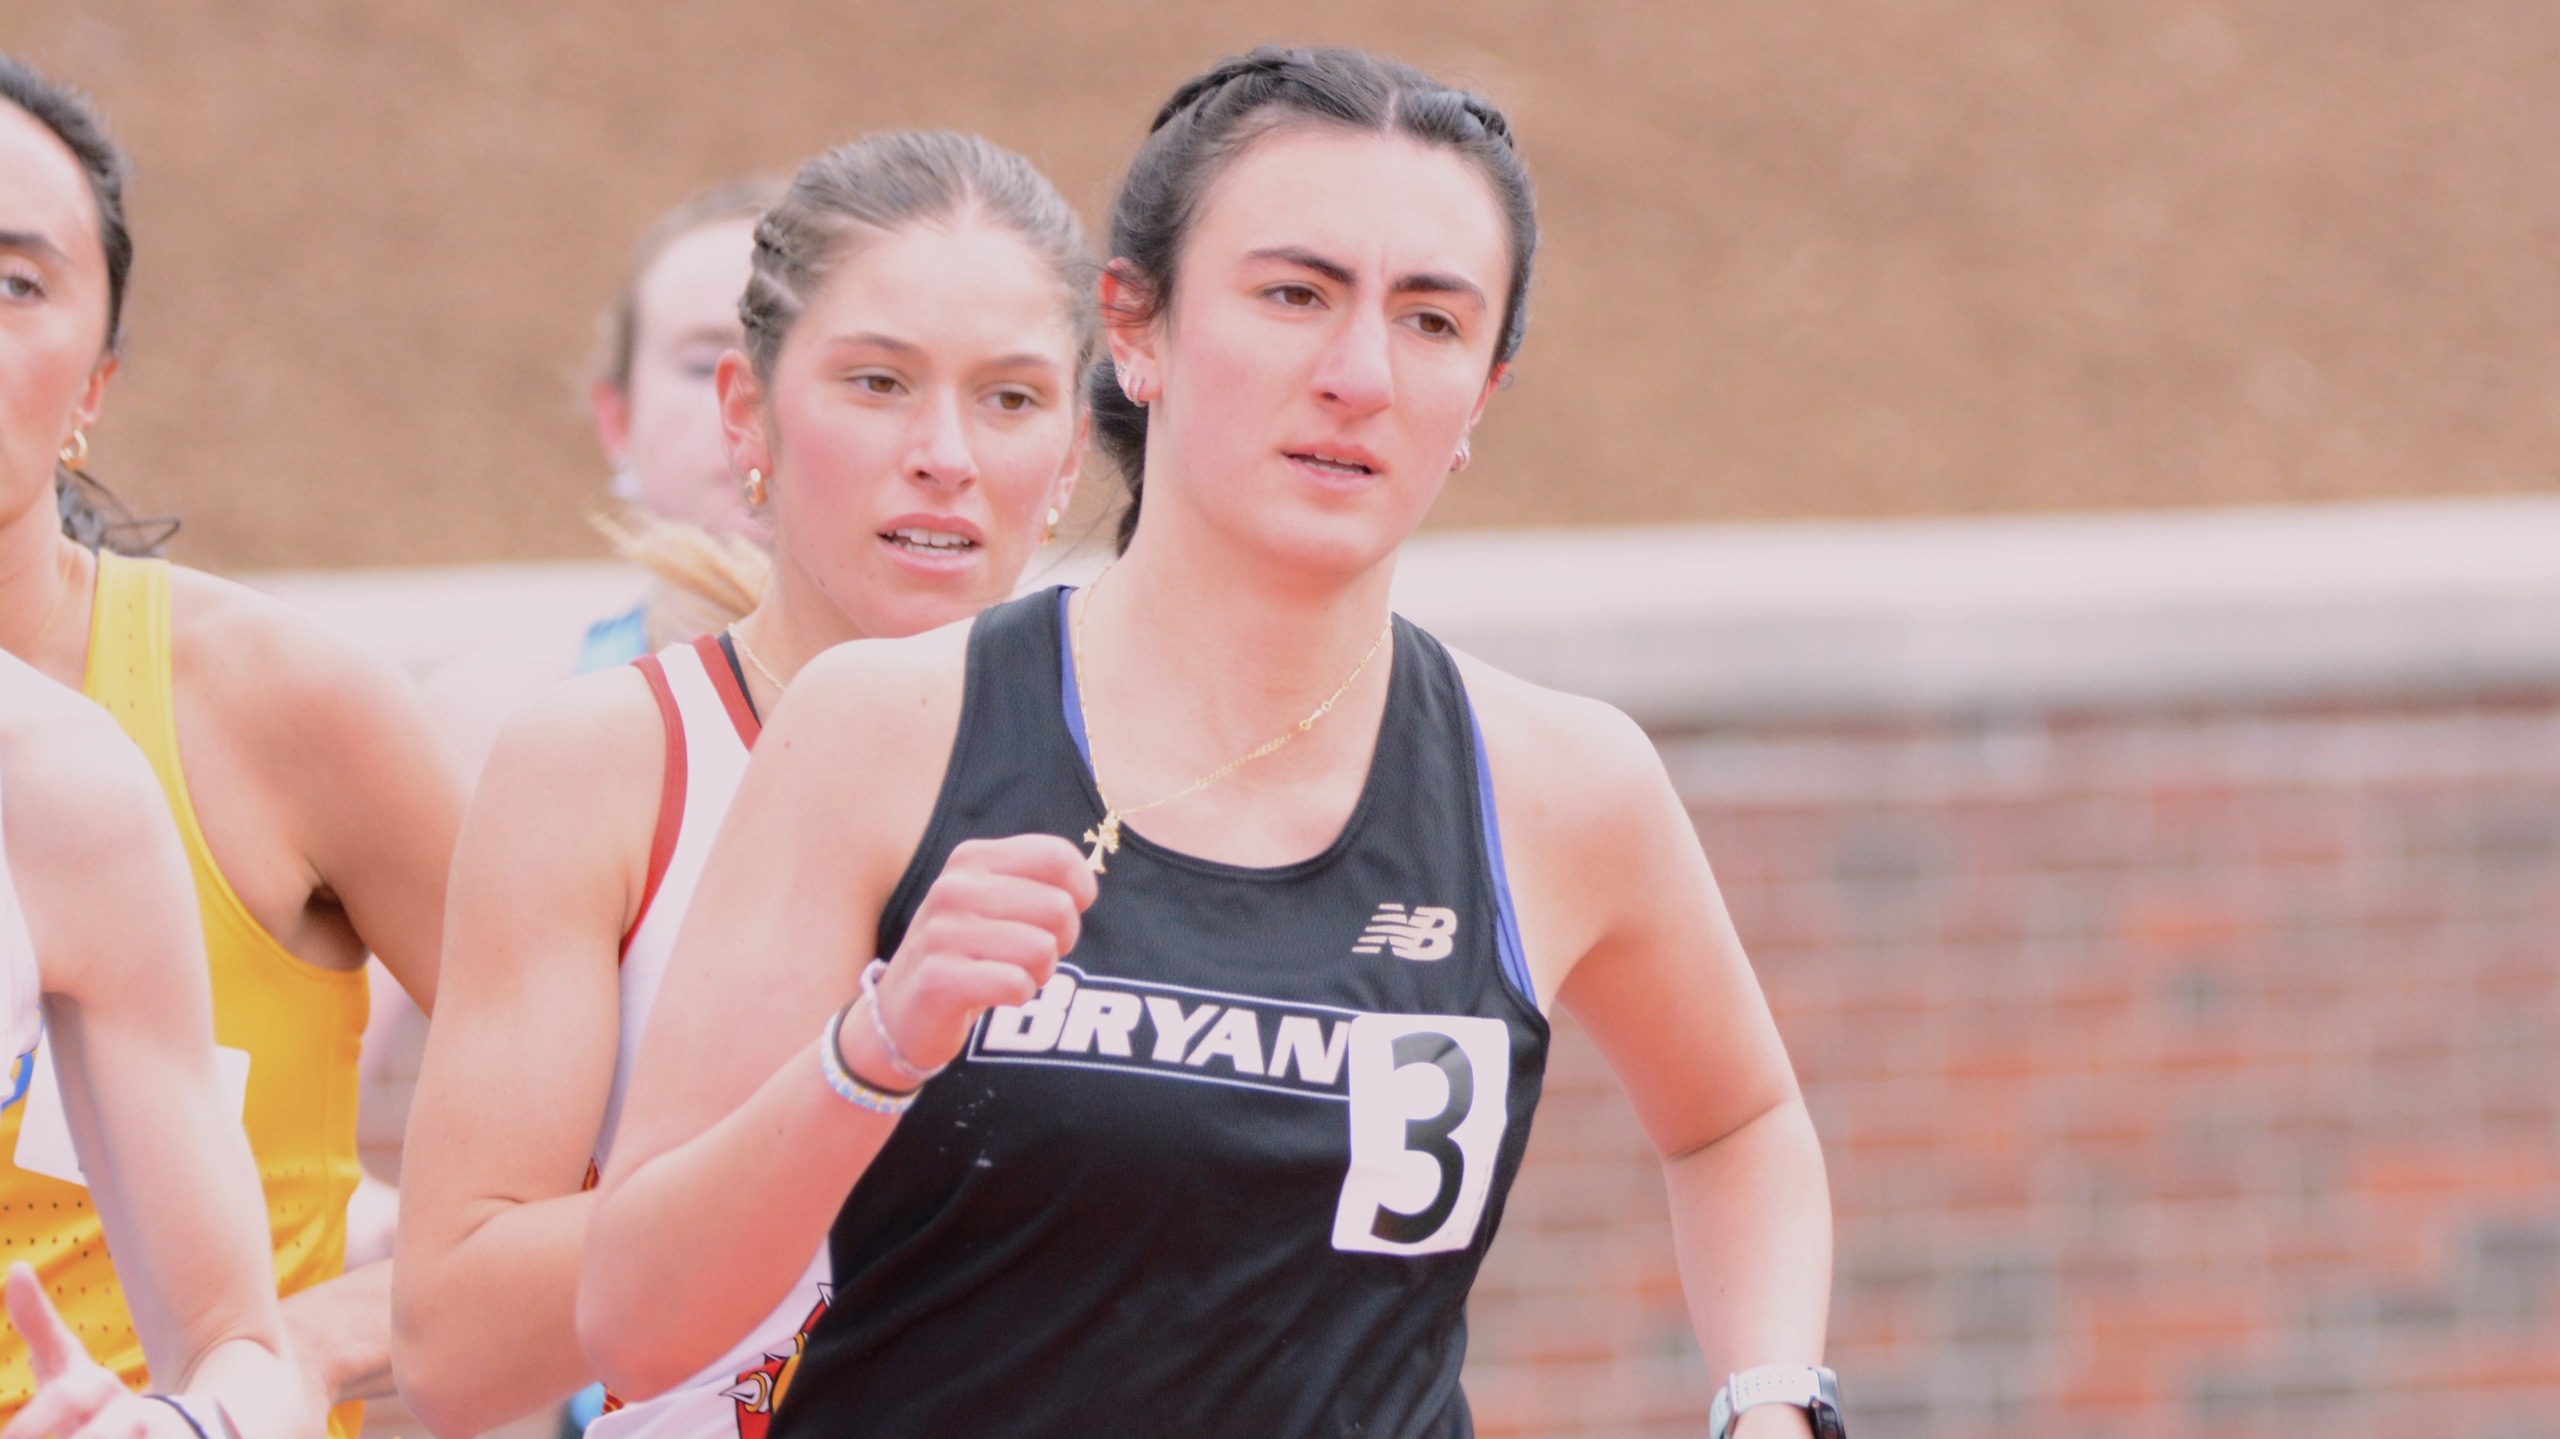 Track and Field closes out weekend with 2 school records, 15 Top 10's between Bucknell and Merrimack